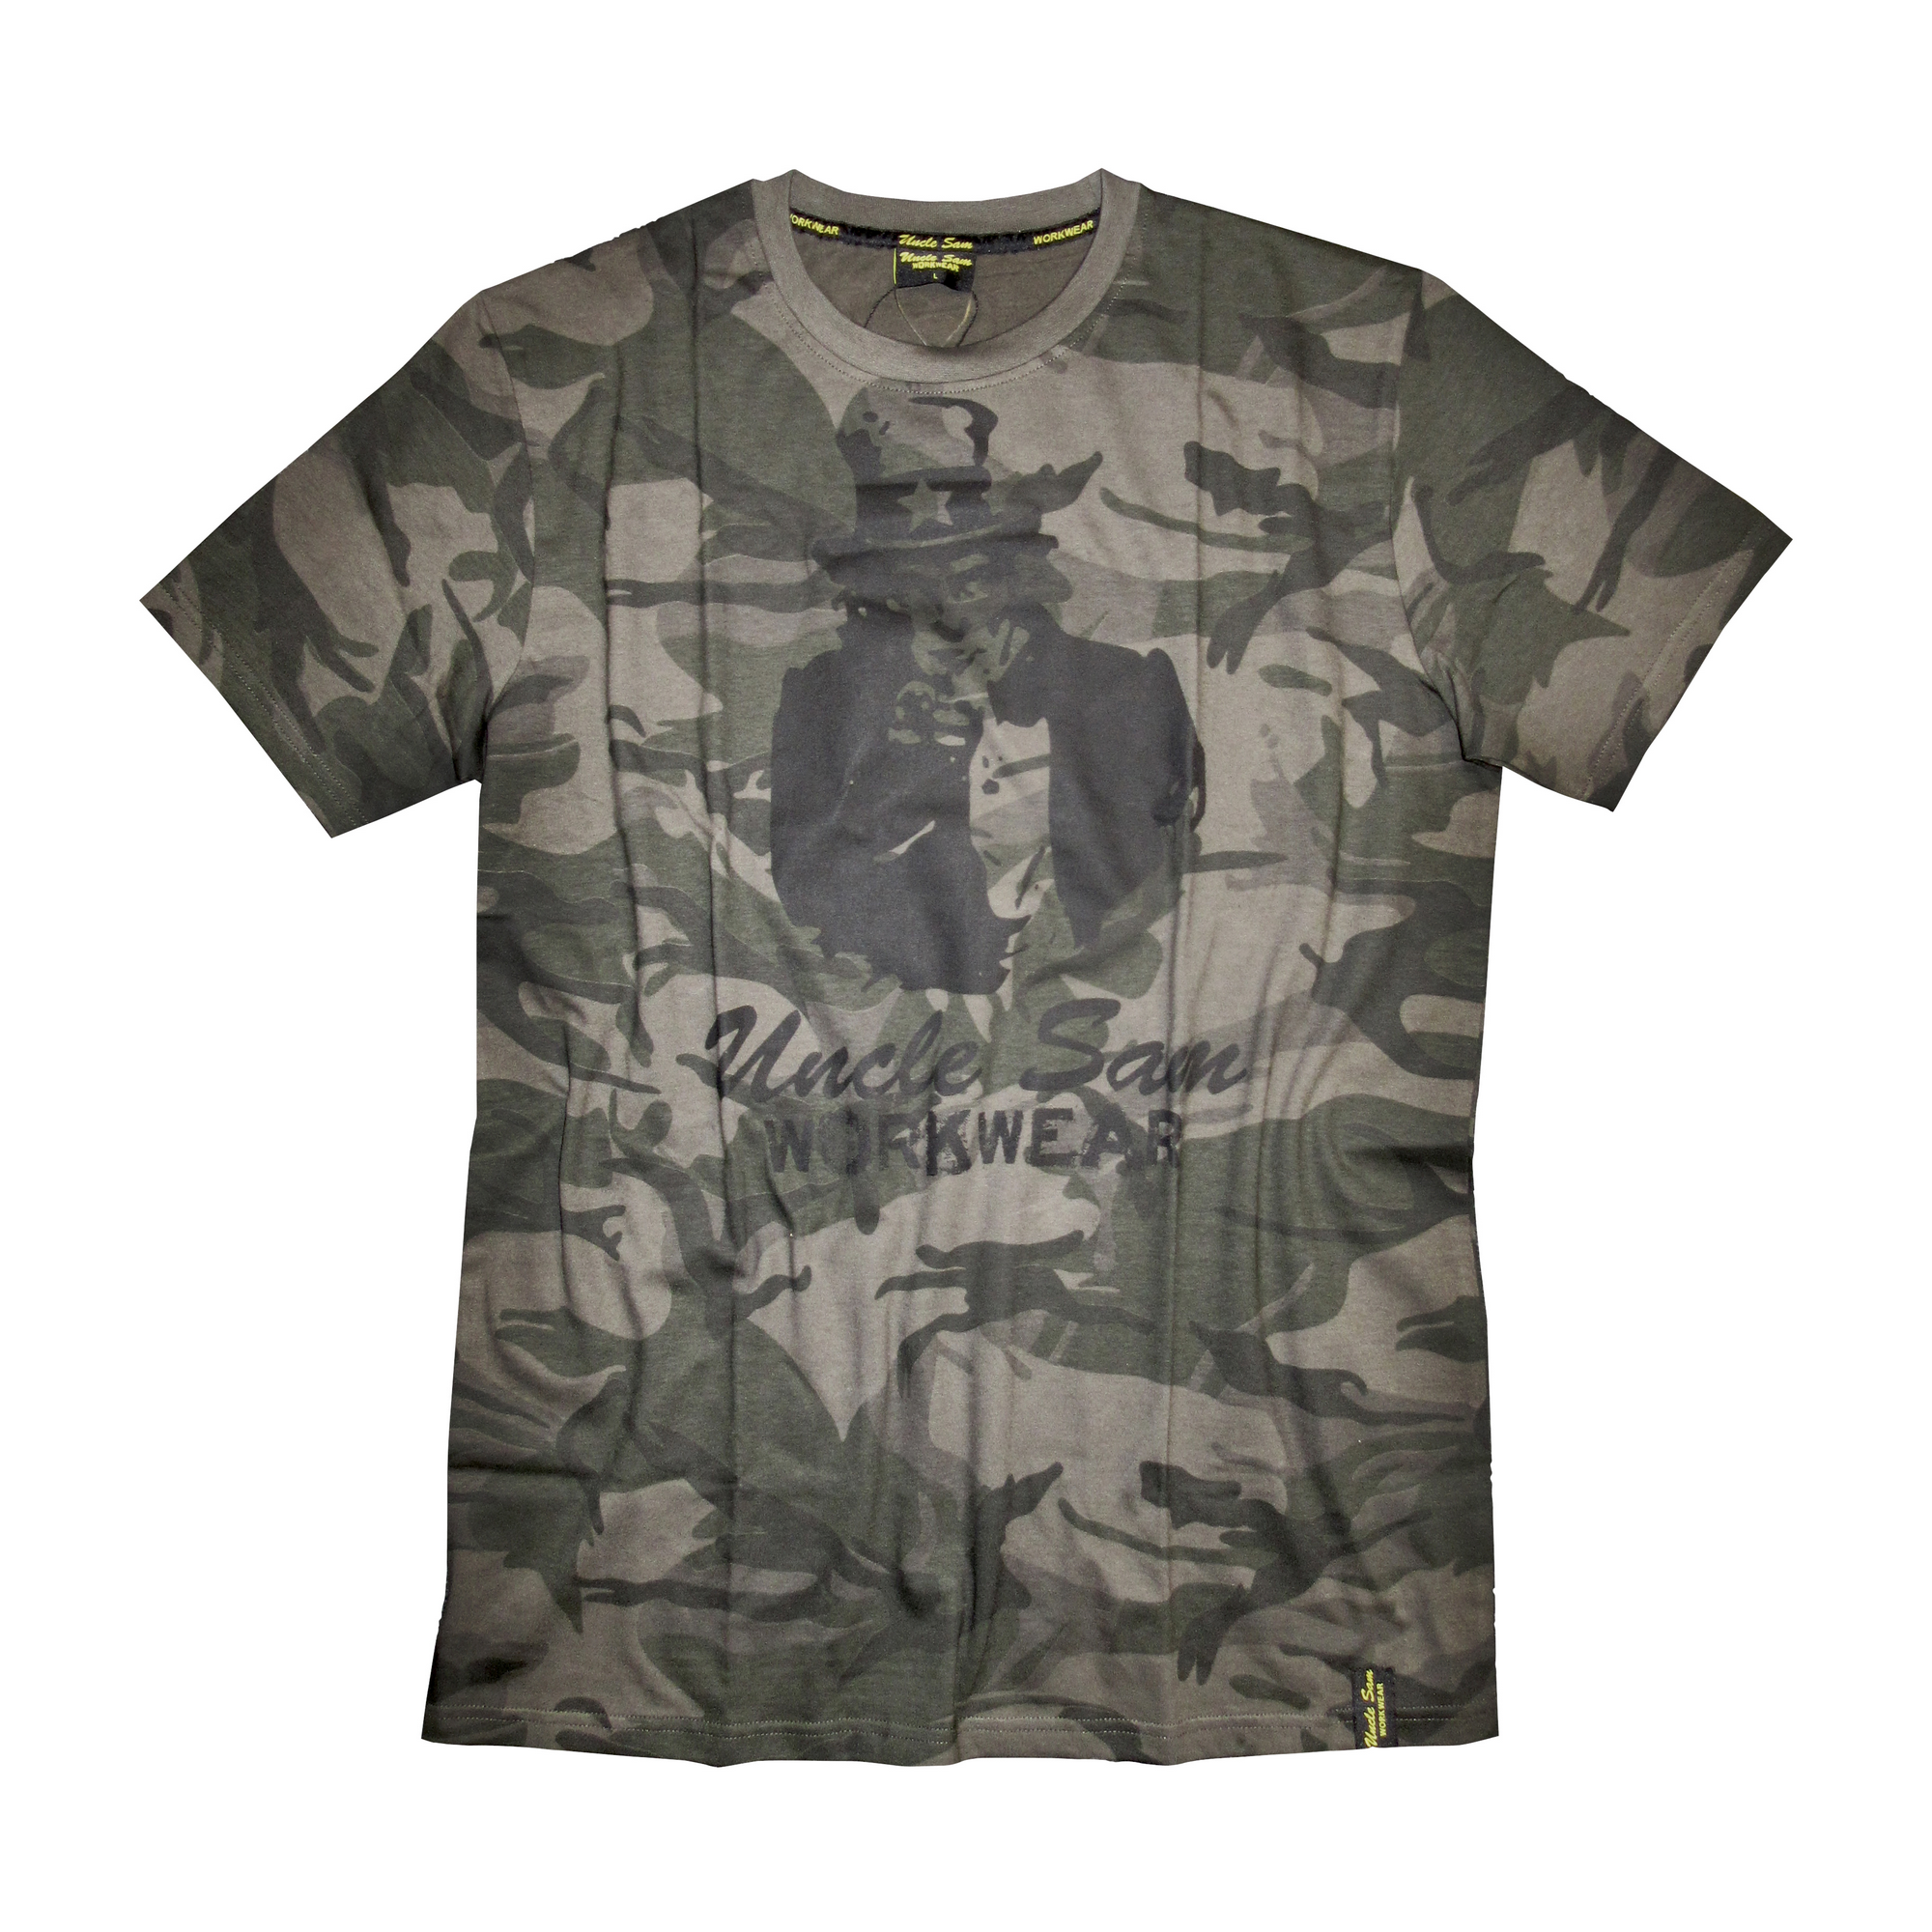 T-Shirt 'Workwear' olive/camouflage XL, Baumwolle + product picture